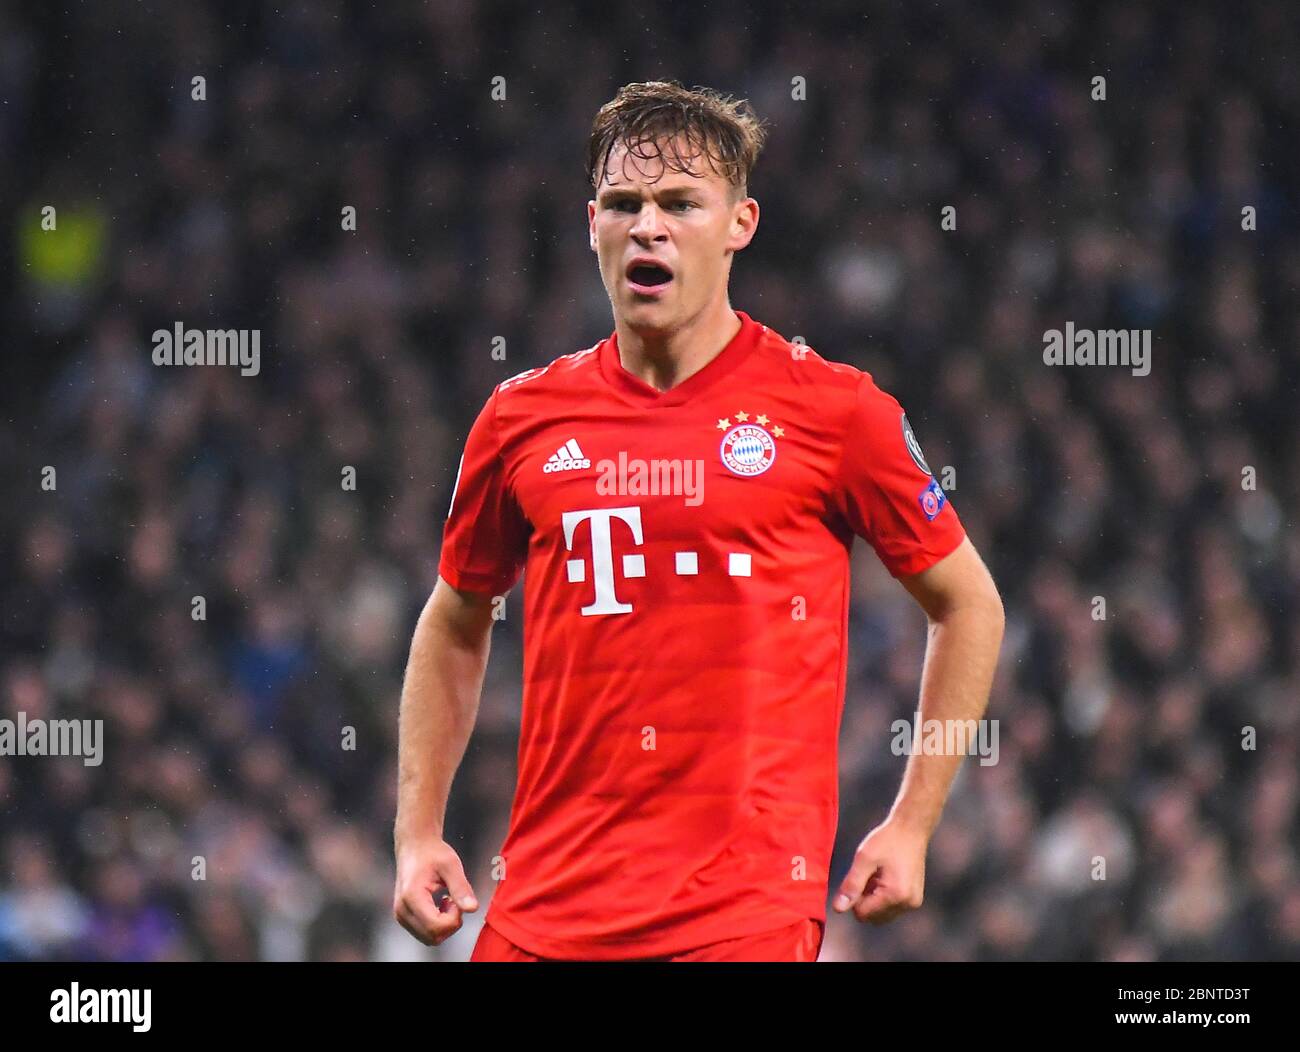 LONDON, ENGLAND - OCTOBER 1, 2019: Joshua Kimmich of Bayern celebrates  after he scored a goal during the 2019/20 UEFA Champions League Group B  game between Tottenham Hotspur FC (England) and Bayern